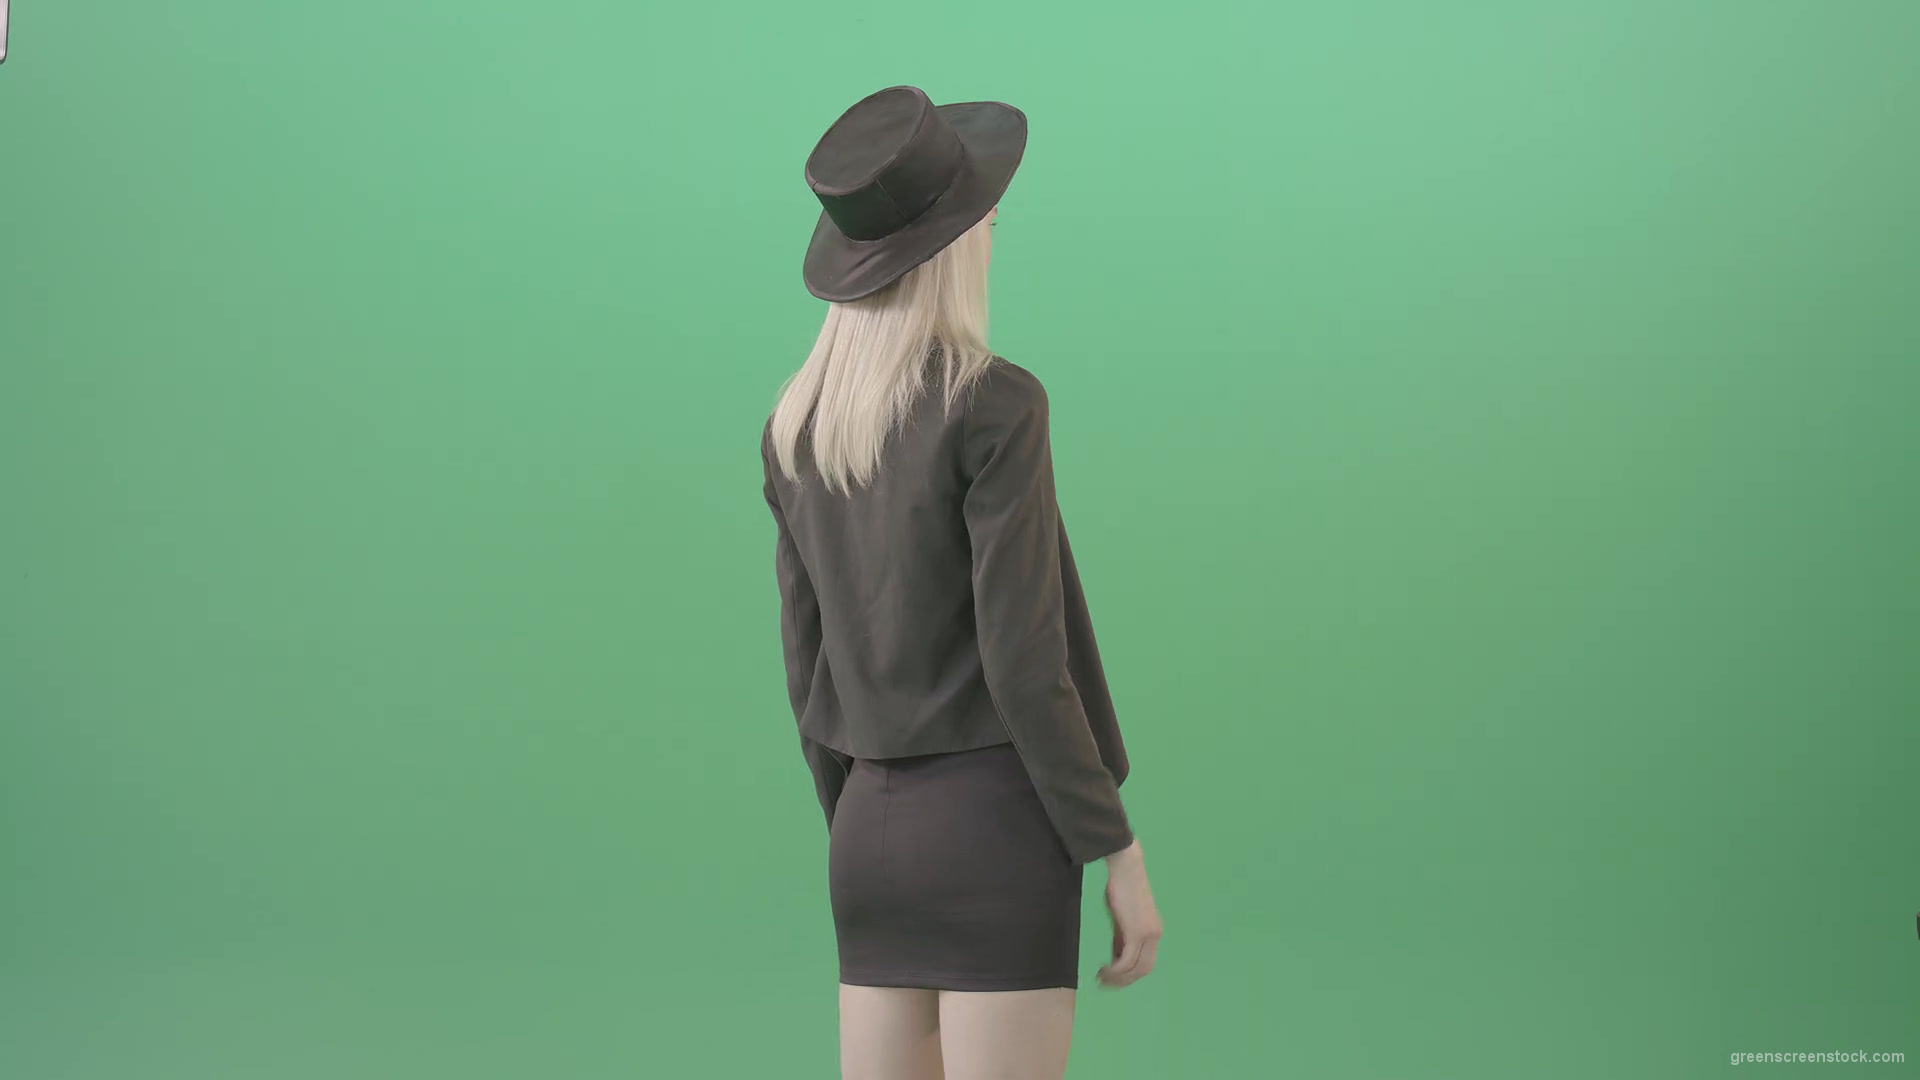 Blonde-Girl-looking-digital-virtual-products-on-touch-screen-from-back-side-4K-Green-Screen-Video-Footage-1920_002 Green Screen Stock